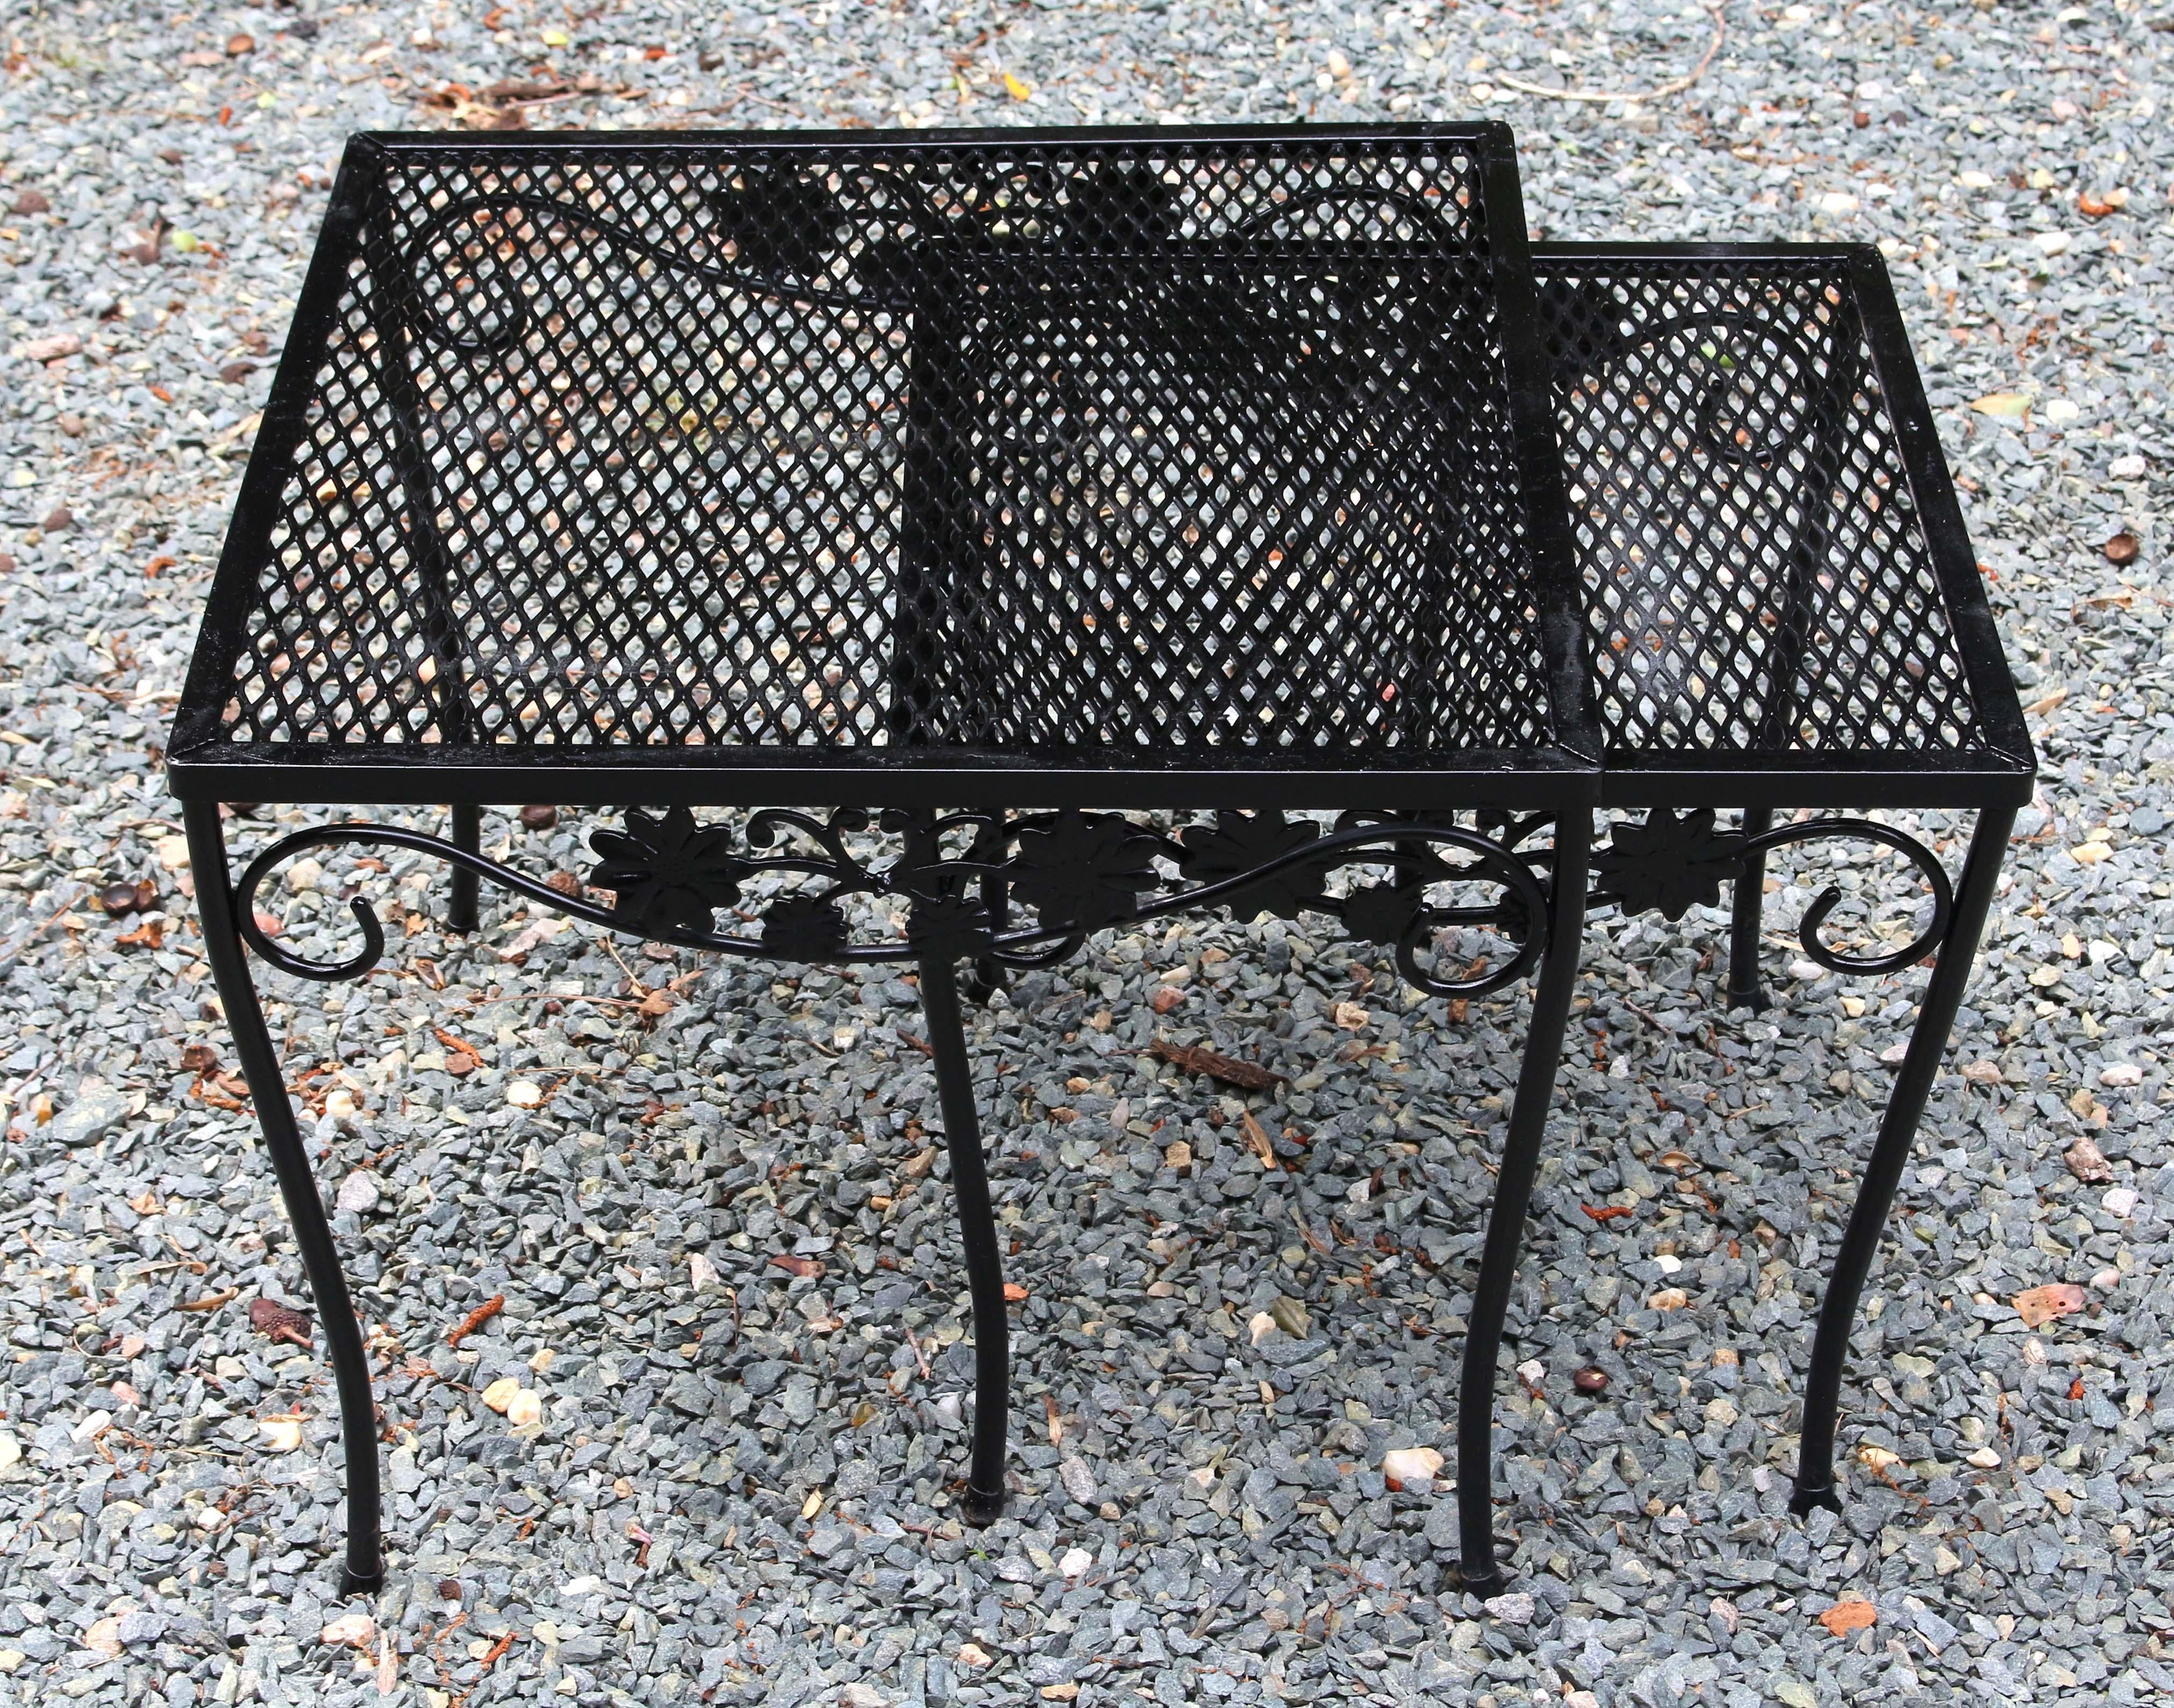 Vintage Woodard set of two outdoor nesting tables, Briarwood pattern, not labeled. Repainted surfaces.
Larger: 19.5